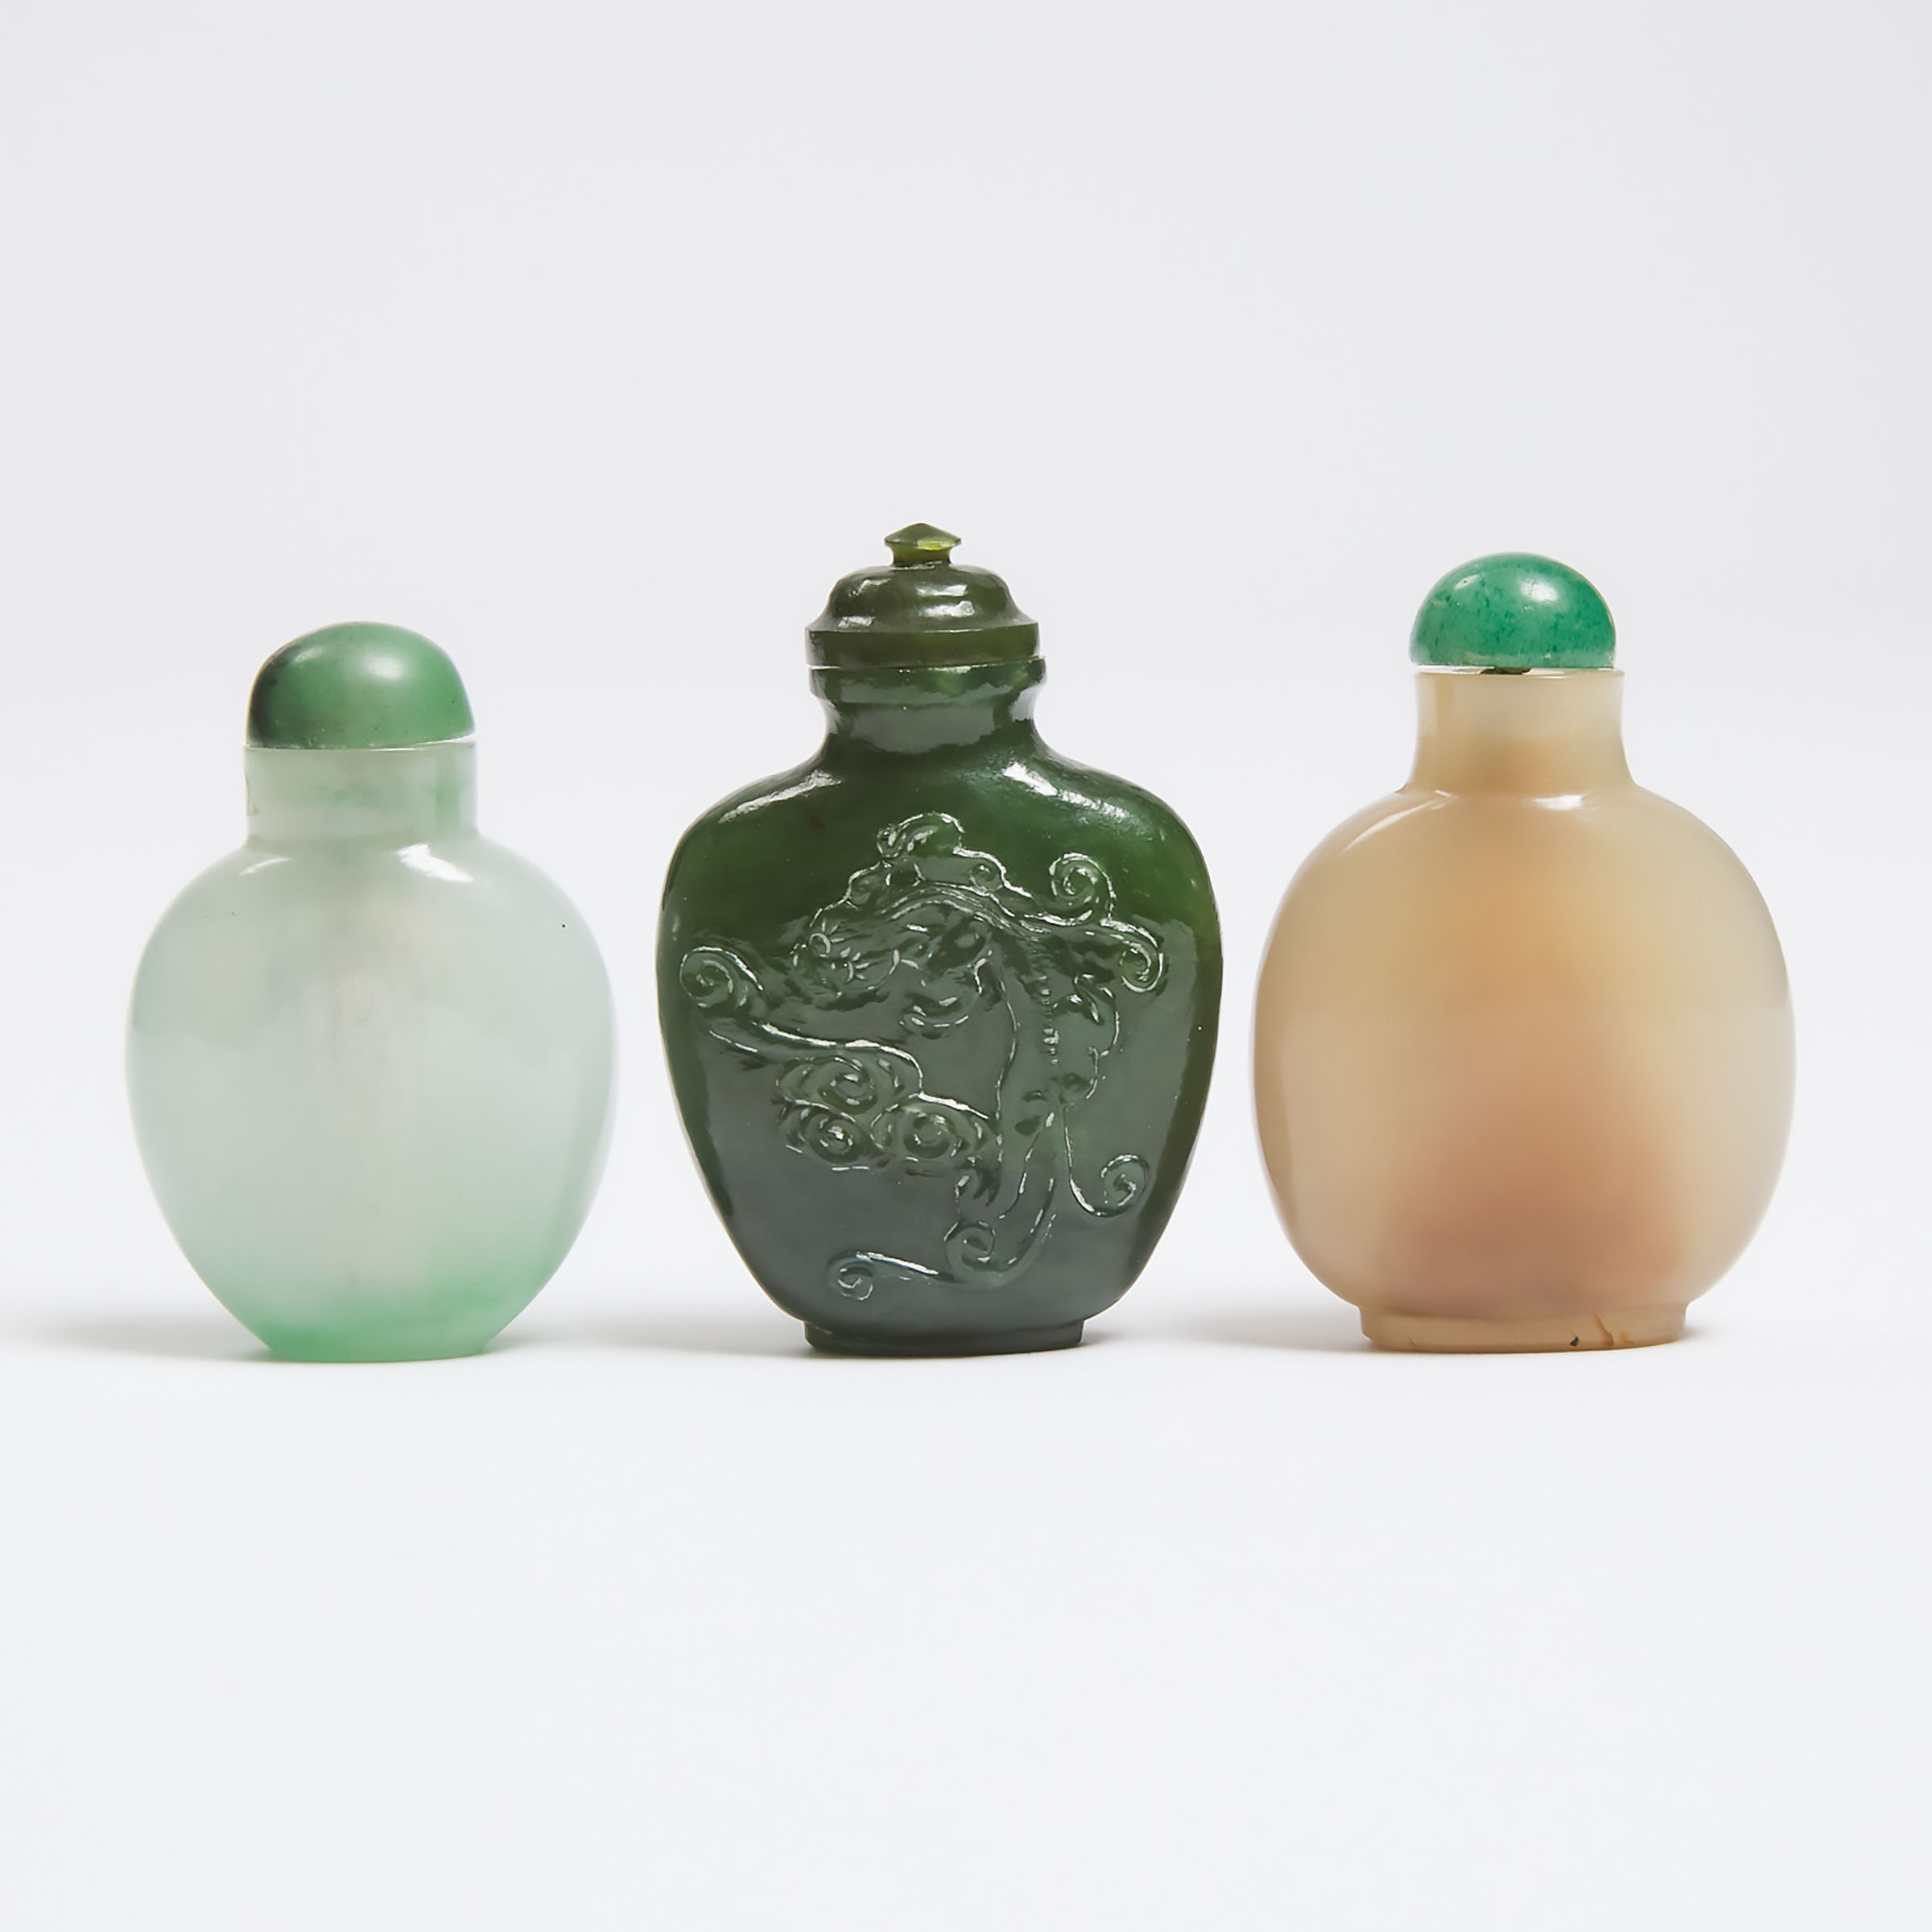 A Jadeite Snuff Bottle, Together With Two Spinach Jade and Agate Snuff Bottles